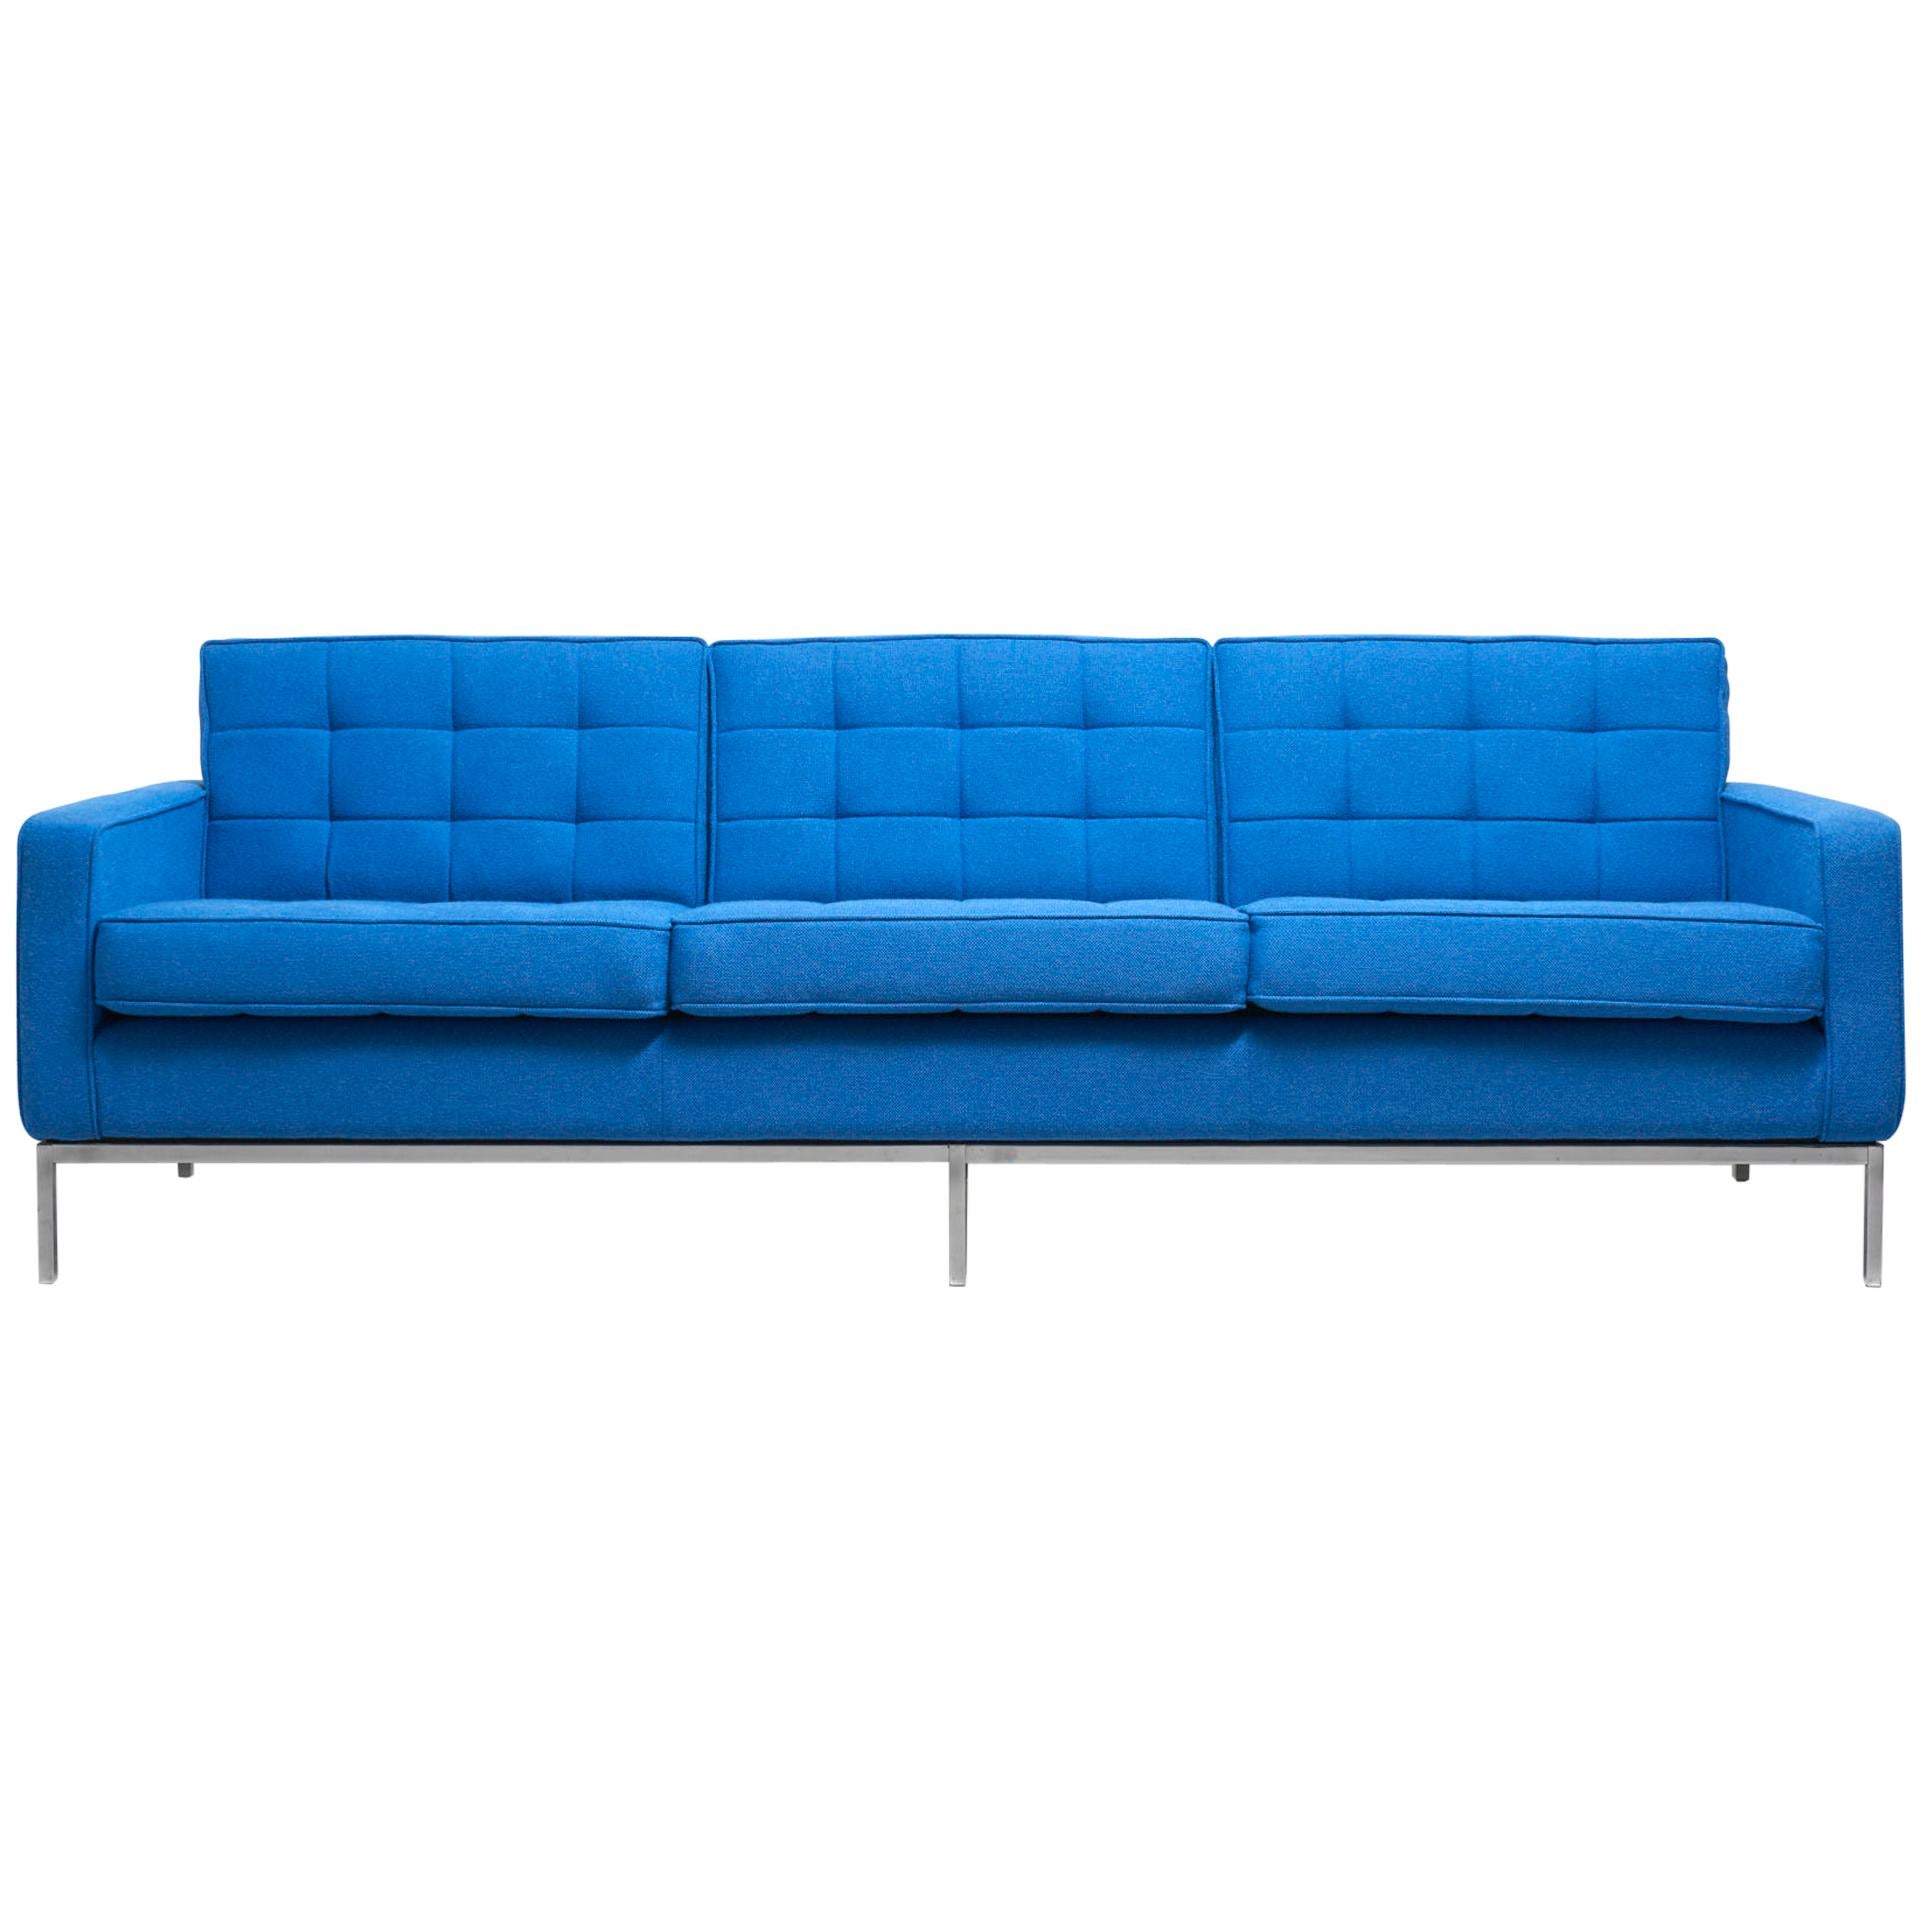 Clear Blue 3 Seat Sofa by Florence Knoll, 1954